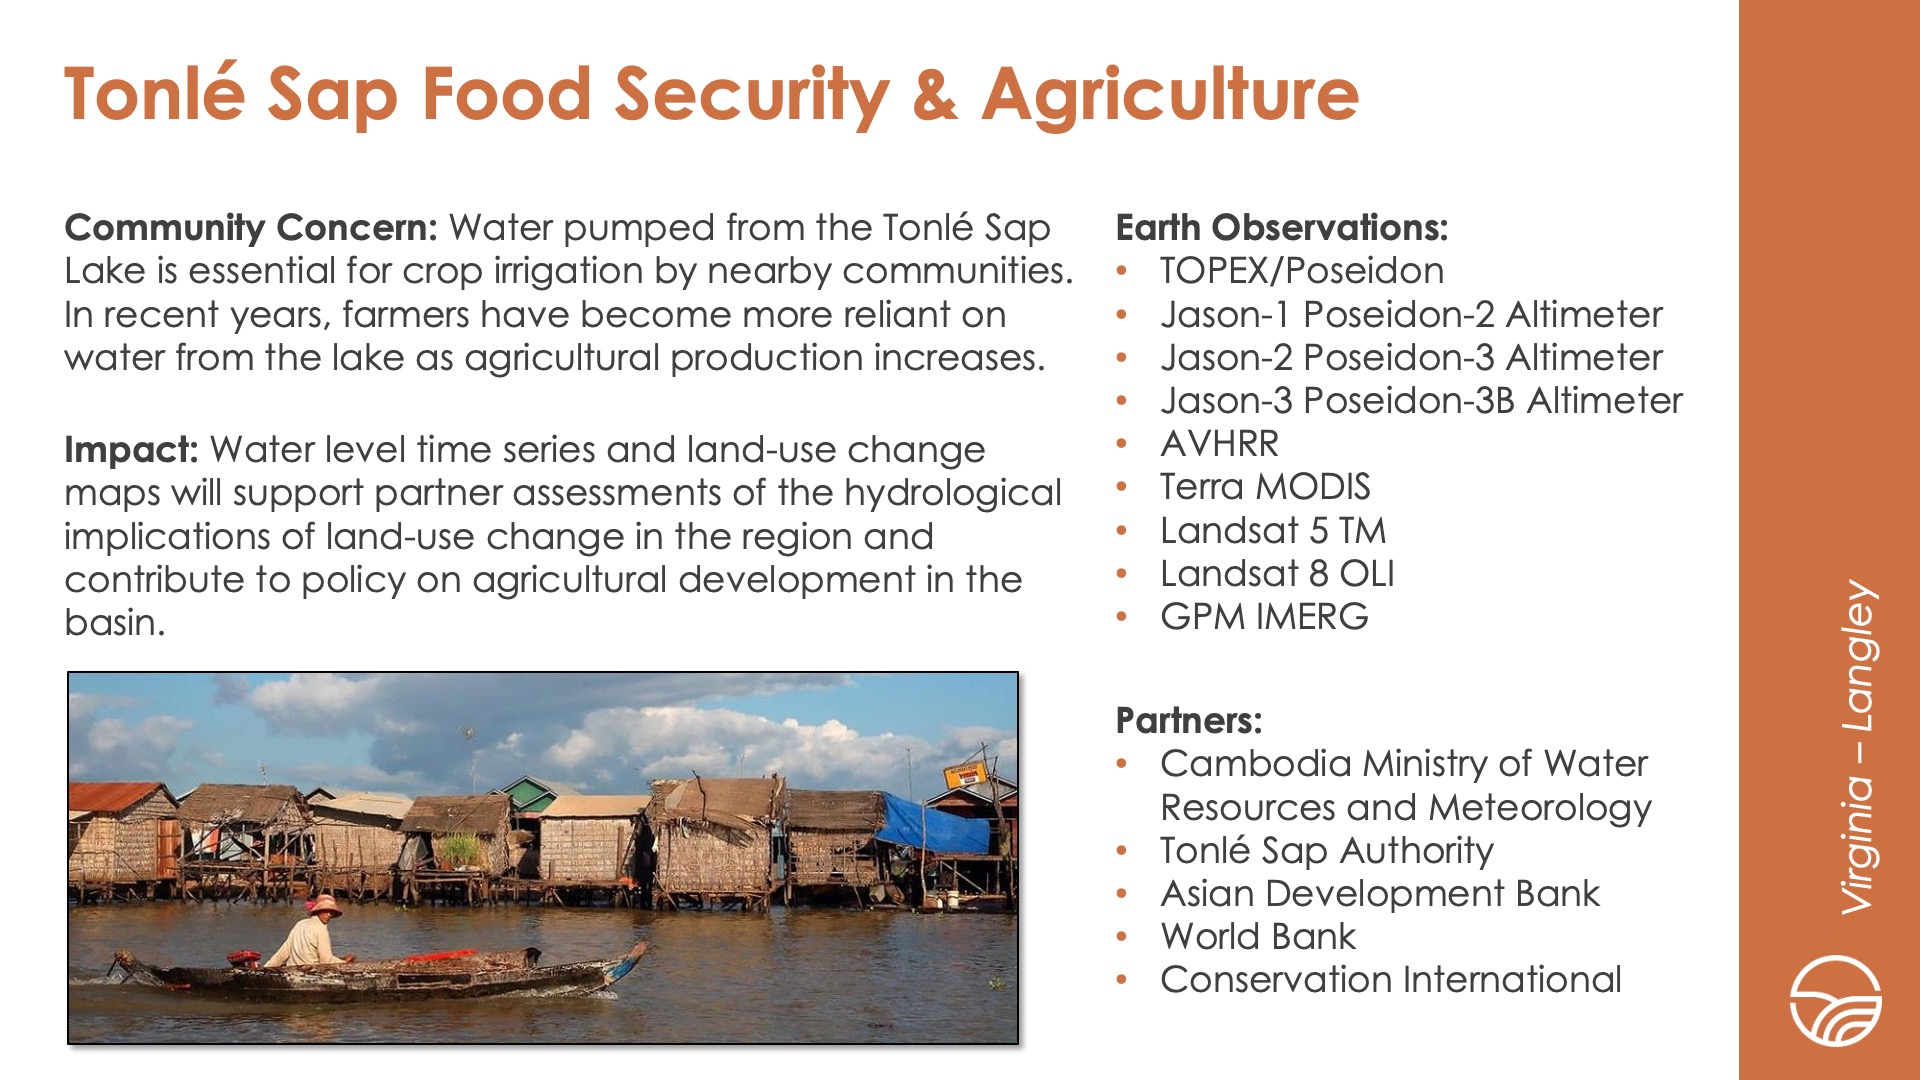 Slide title: Tonlé Sap Food Security & AgricultureDEVELOP Node: Virginia - LangleyCommunity Concern: Water pumped from the Tonlé Sap Lake is essential for crop irrigation by nearby communities. In recent years, farmers have become more reliant on water from the lake as agricultural production increases.Impact: Water level time series and land-use change maps will support partner assessments of the hydrological implications of land-use change in the region and contribute to policy on agricultural development in the basin.Partners: Cambodia Ministry of Water Resources and Meteorology, Tonlé Sap Authority, Asian Development Bank, World Bank, Conservation InternationalEarth Observations: TOPEX/Poseidon, Jason-1 Poseidon-2 Altimeter, Jason-2 Poseidon-3 Altimeter, Jason-3 Poseidon-3B Altimeter, AVHRR, Terra MODIS, Landsat 5 TM, Landsat 8 OLI, GPM IMERG